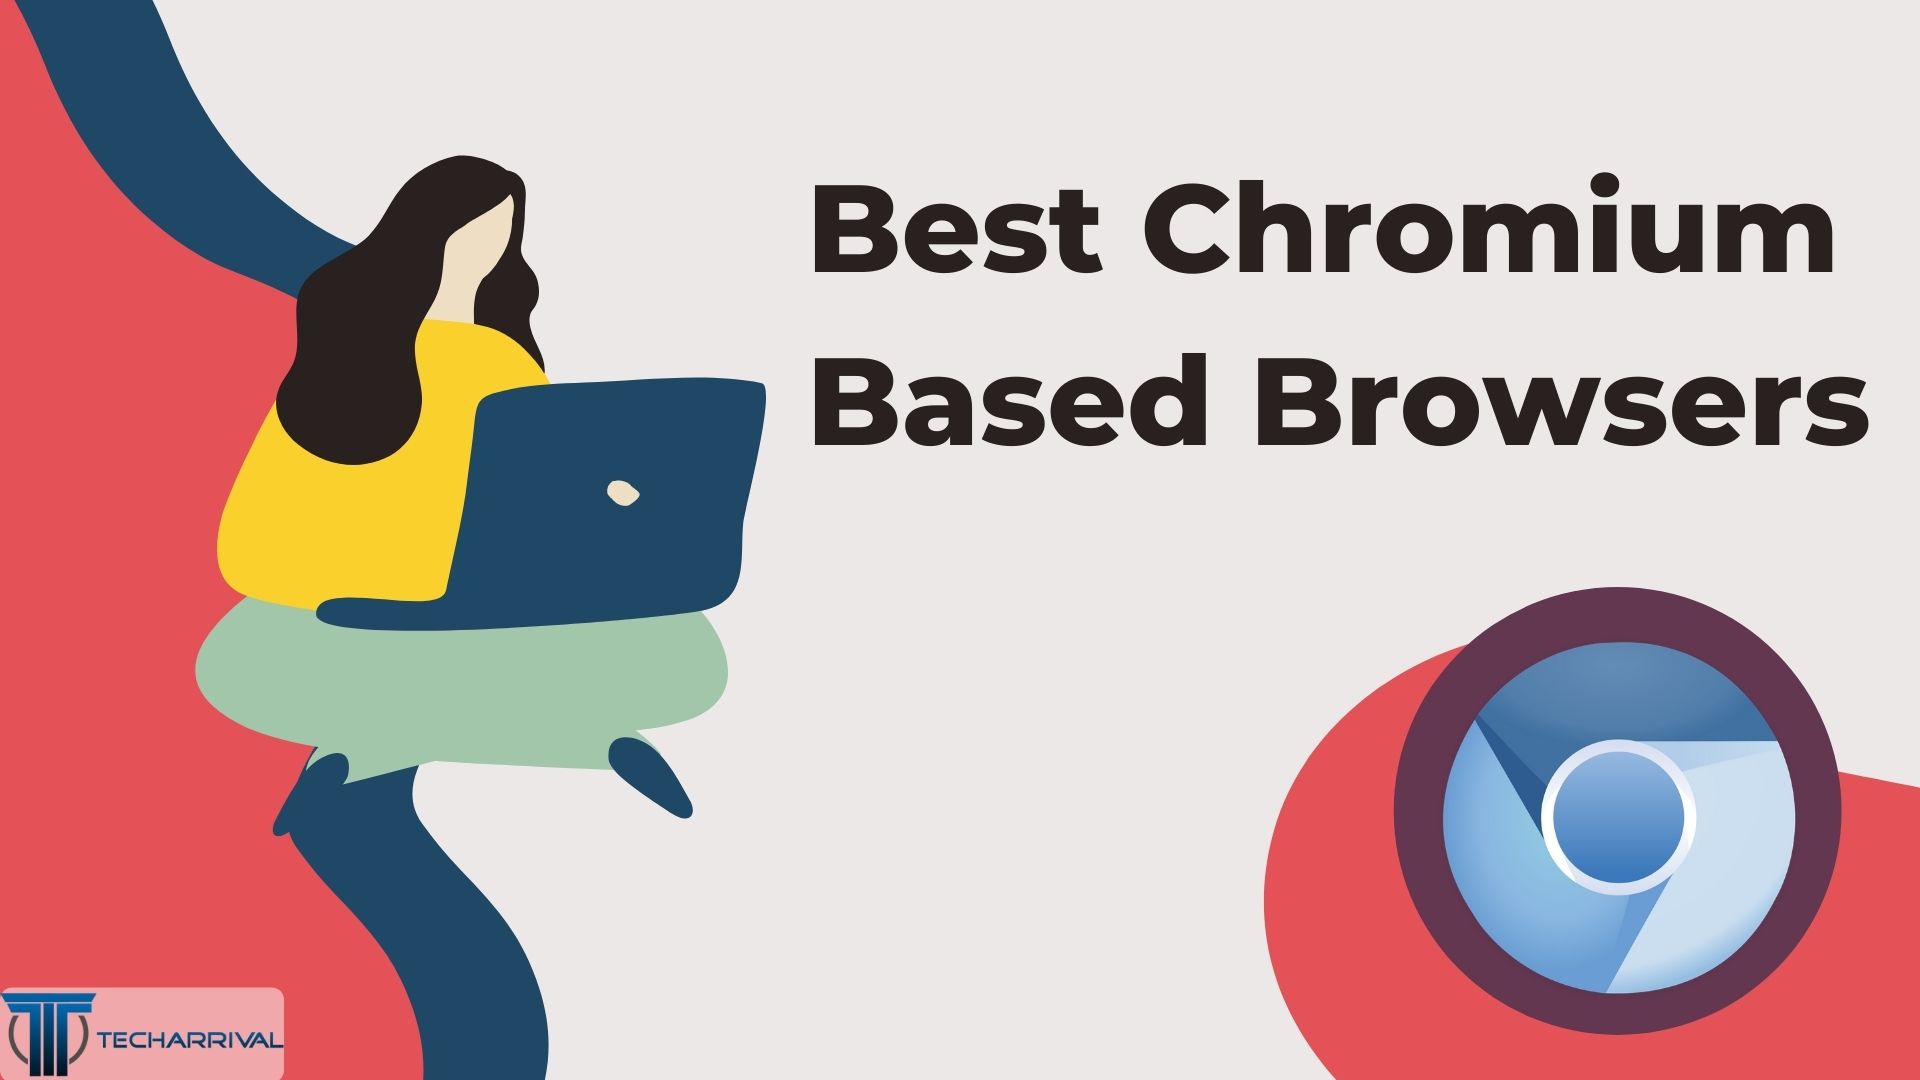 browsers not based on chromium